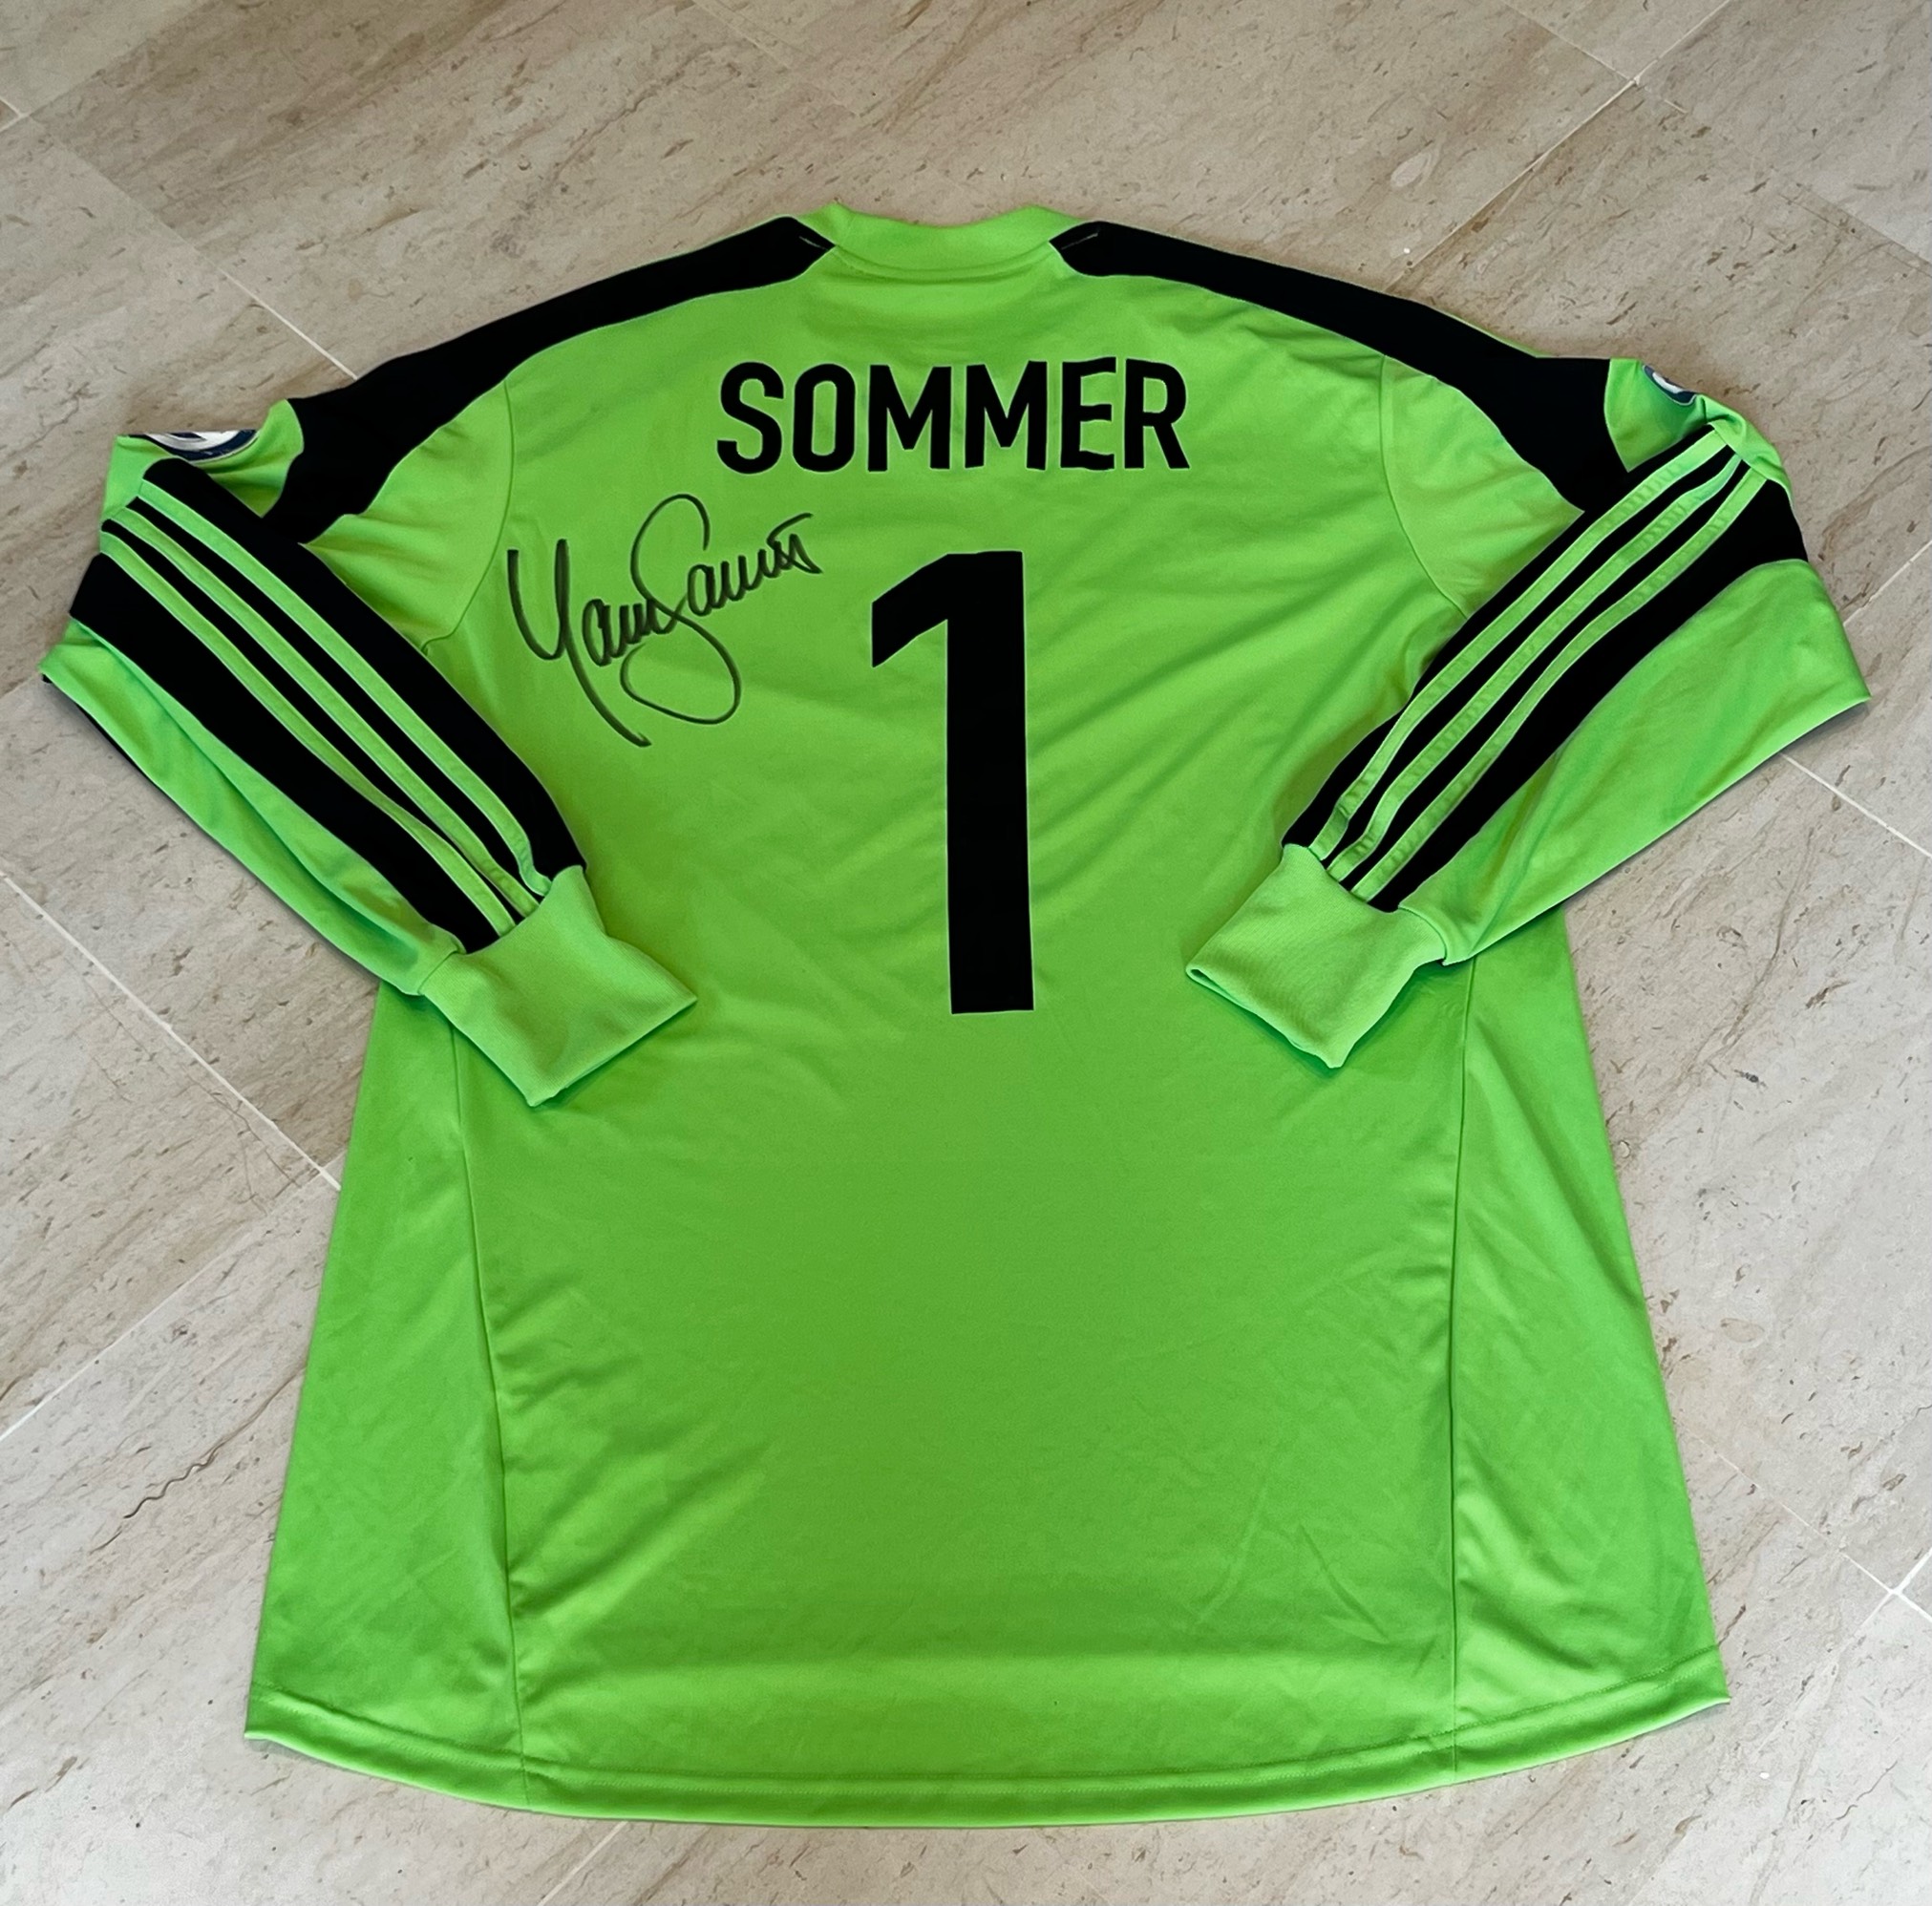 Buy Or Sell Authentic Football Shirts - Your Football Shirt